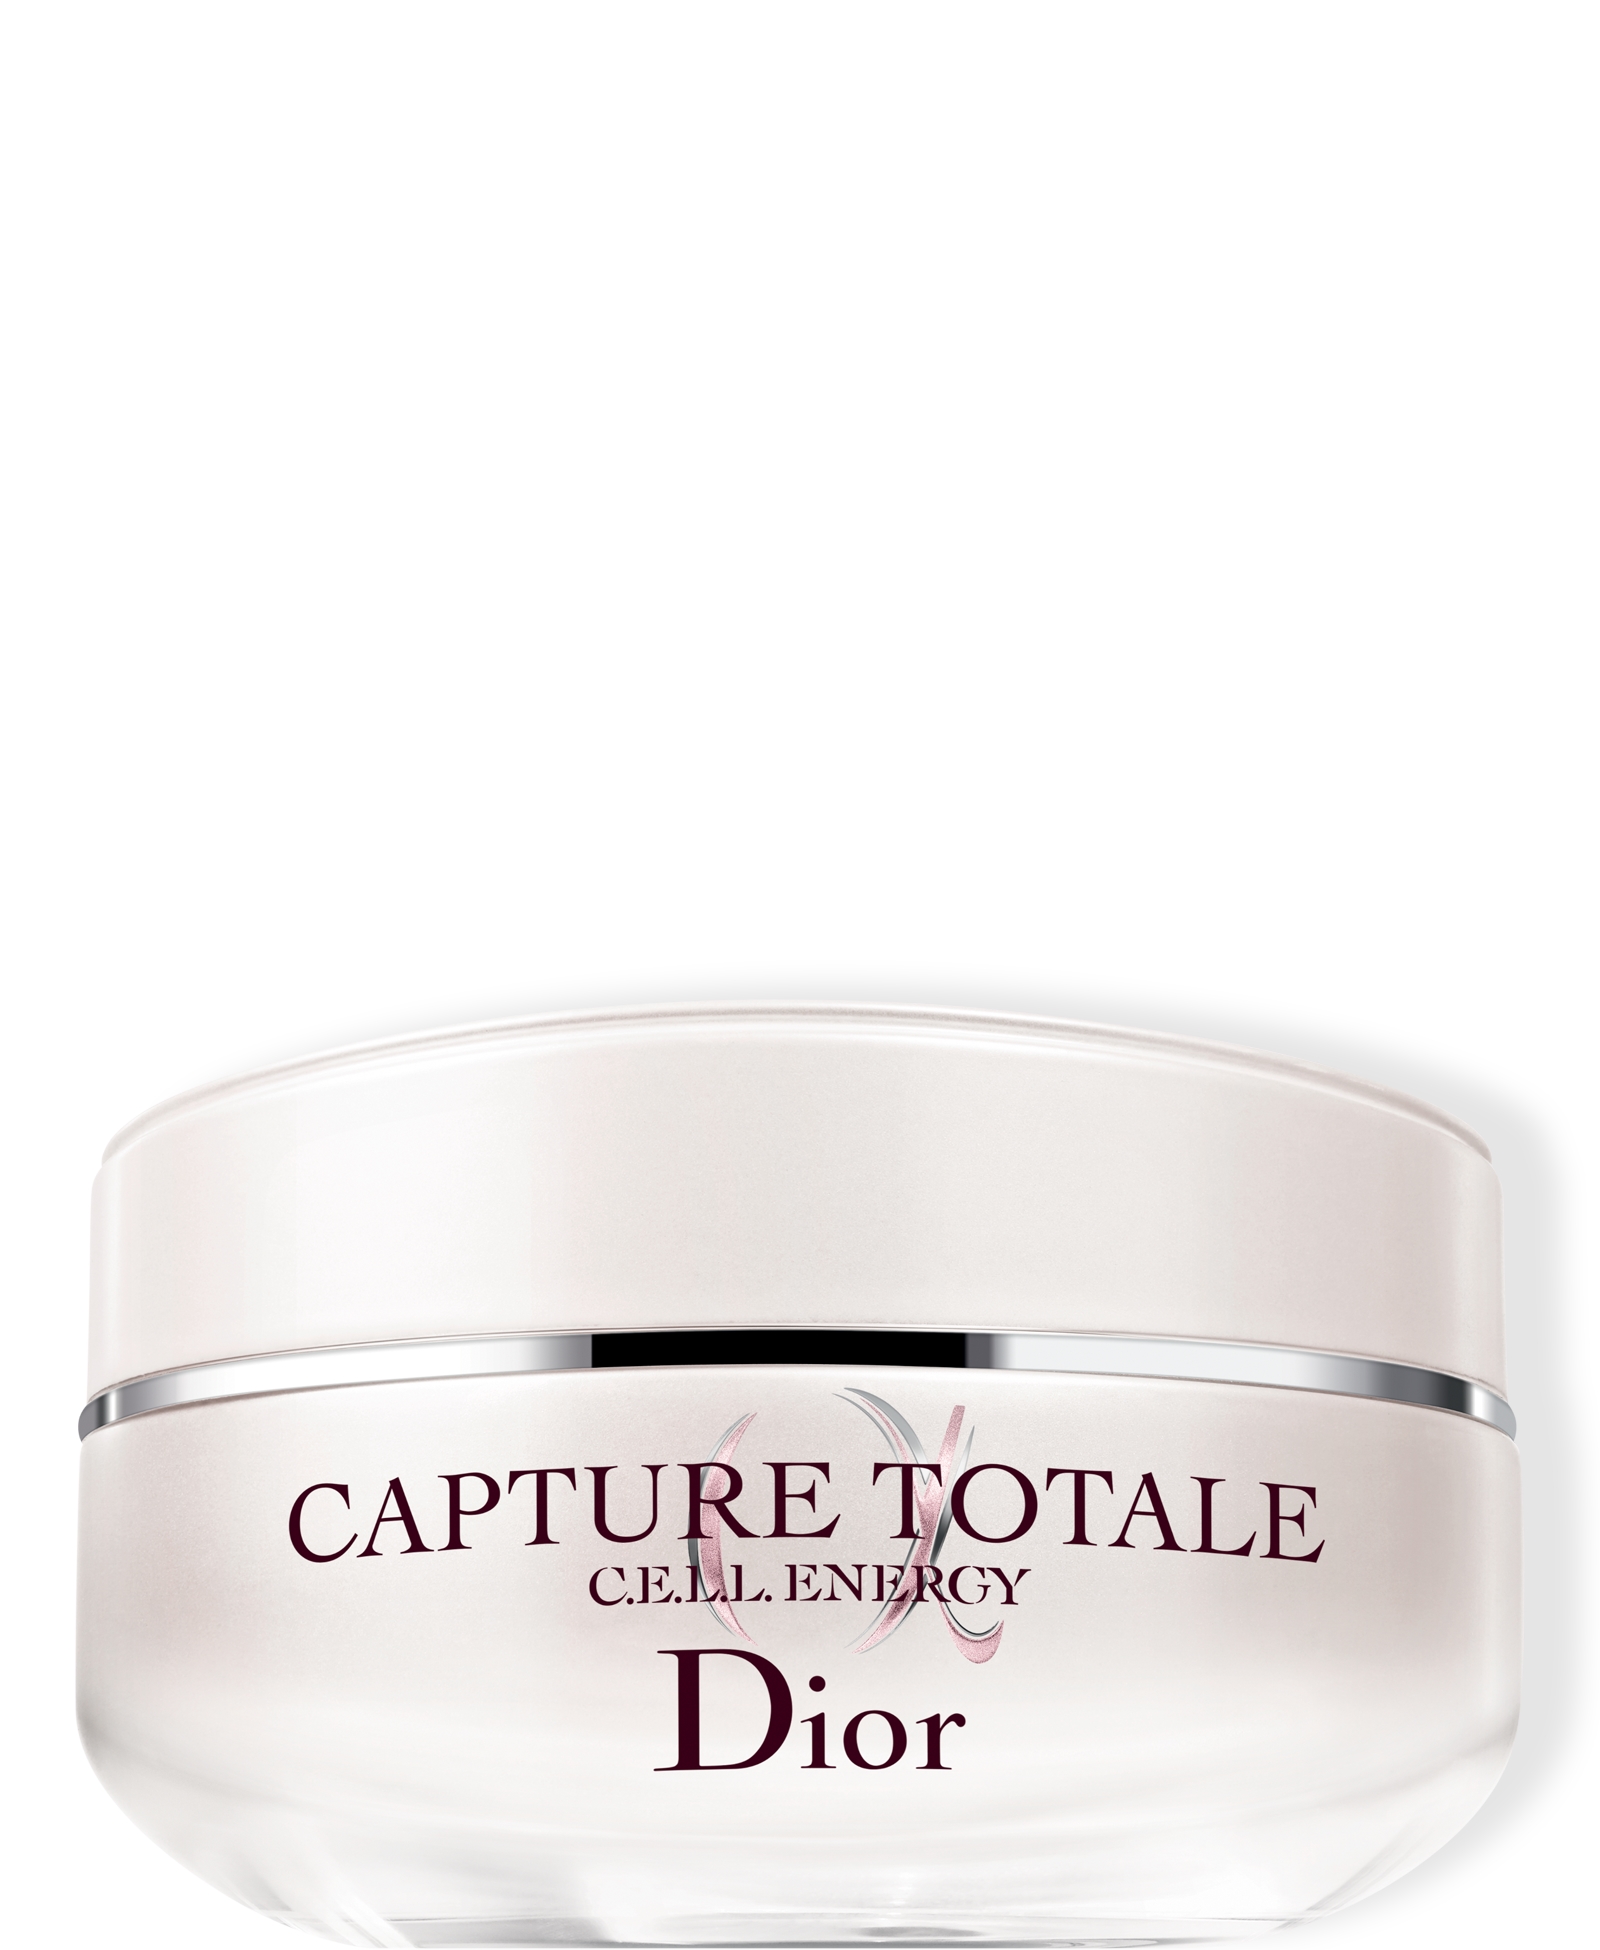 Capture Totale C.E.L.L. ENERGY - Firming & Wrinkle-Correcting Creme